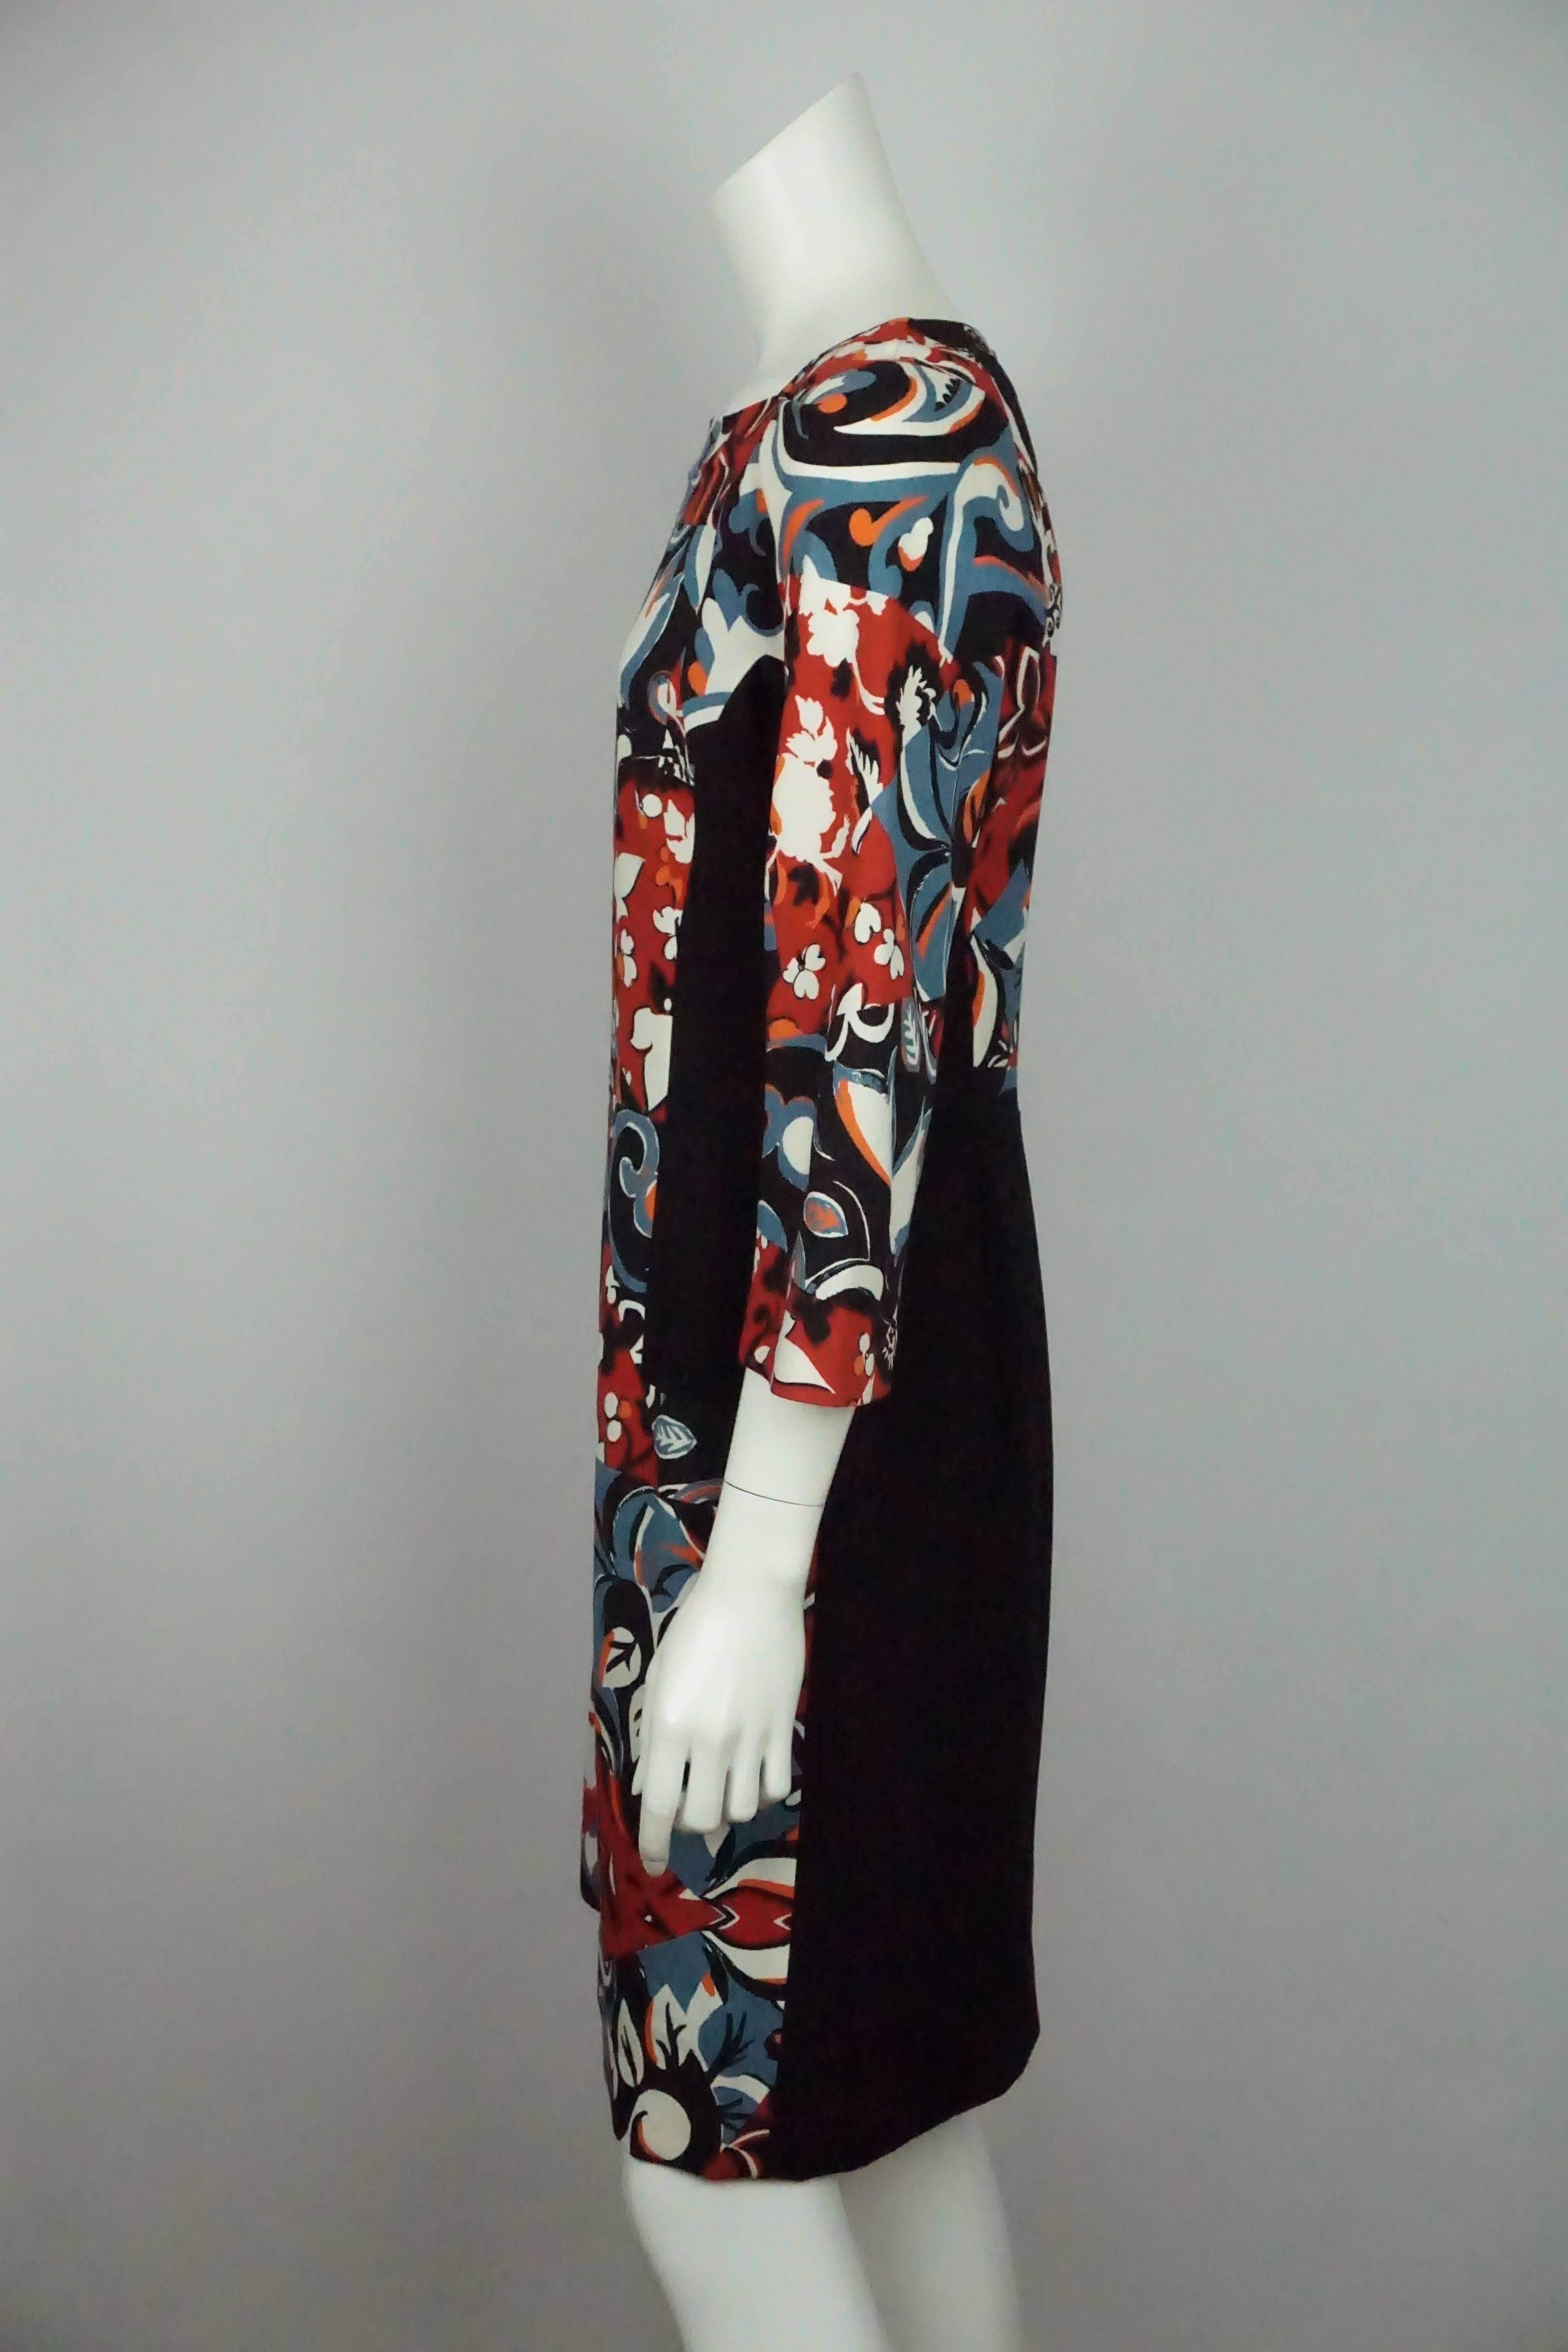 Etro Black And Multi Floral Silk Print 3/4 Sleeve Dress - 46  This floral dress is in excellent condition. It is made of wool and silk. The dress has a floral and geometric print in white, red, black, orange, and teal. From the inside of the arm